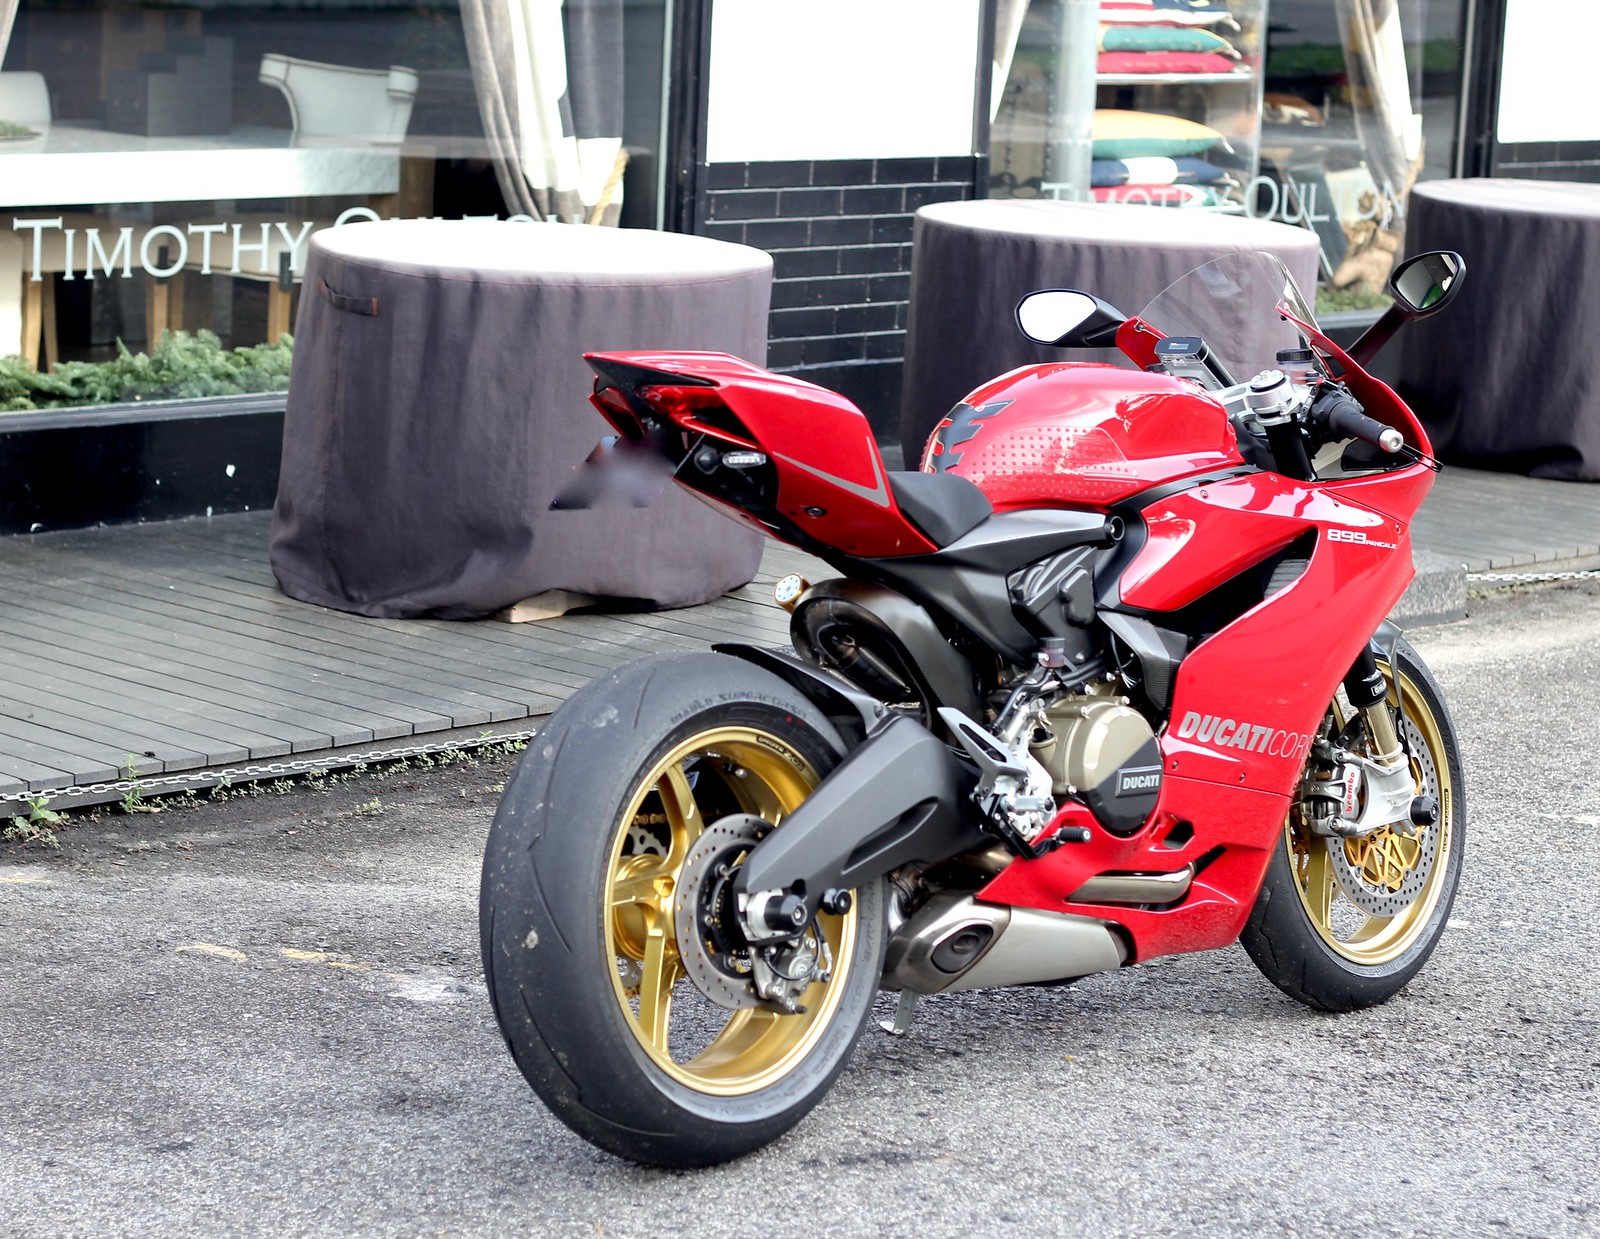 Red Ducati 899 Panigale Picture Thread - Page 20 - Ducati 899 Panigale ...